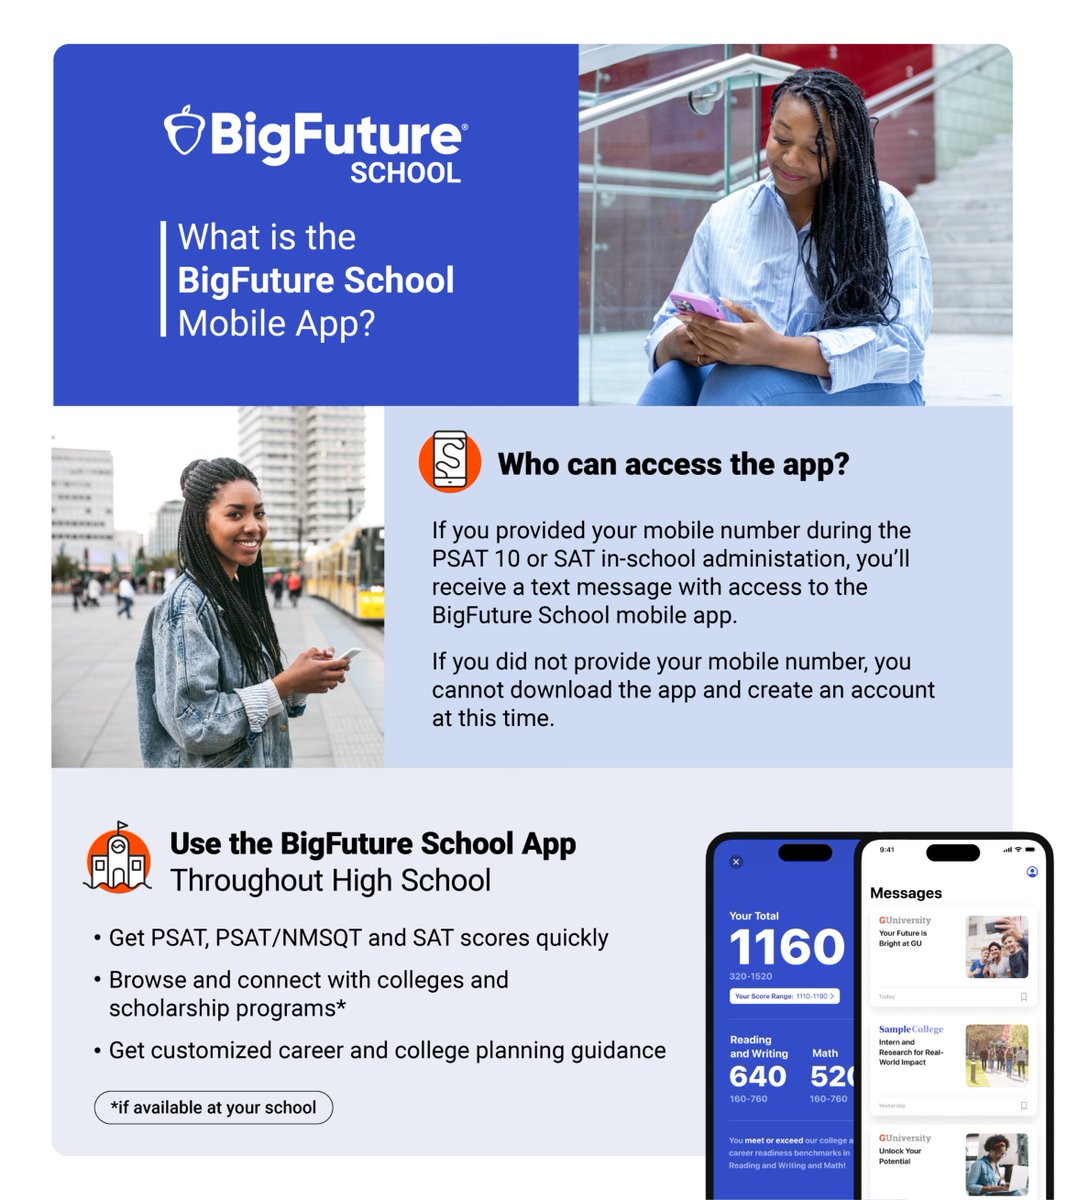 The BigFuture School app is available for students who provided their phone number during the PSAT 10 or SAT in-school administration. spr.ly/6011bvEtv